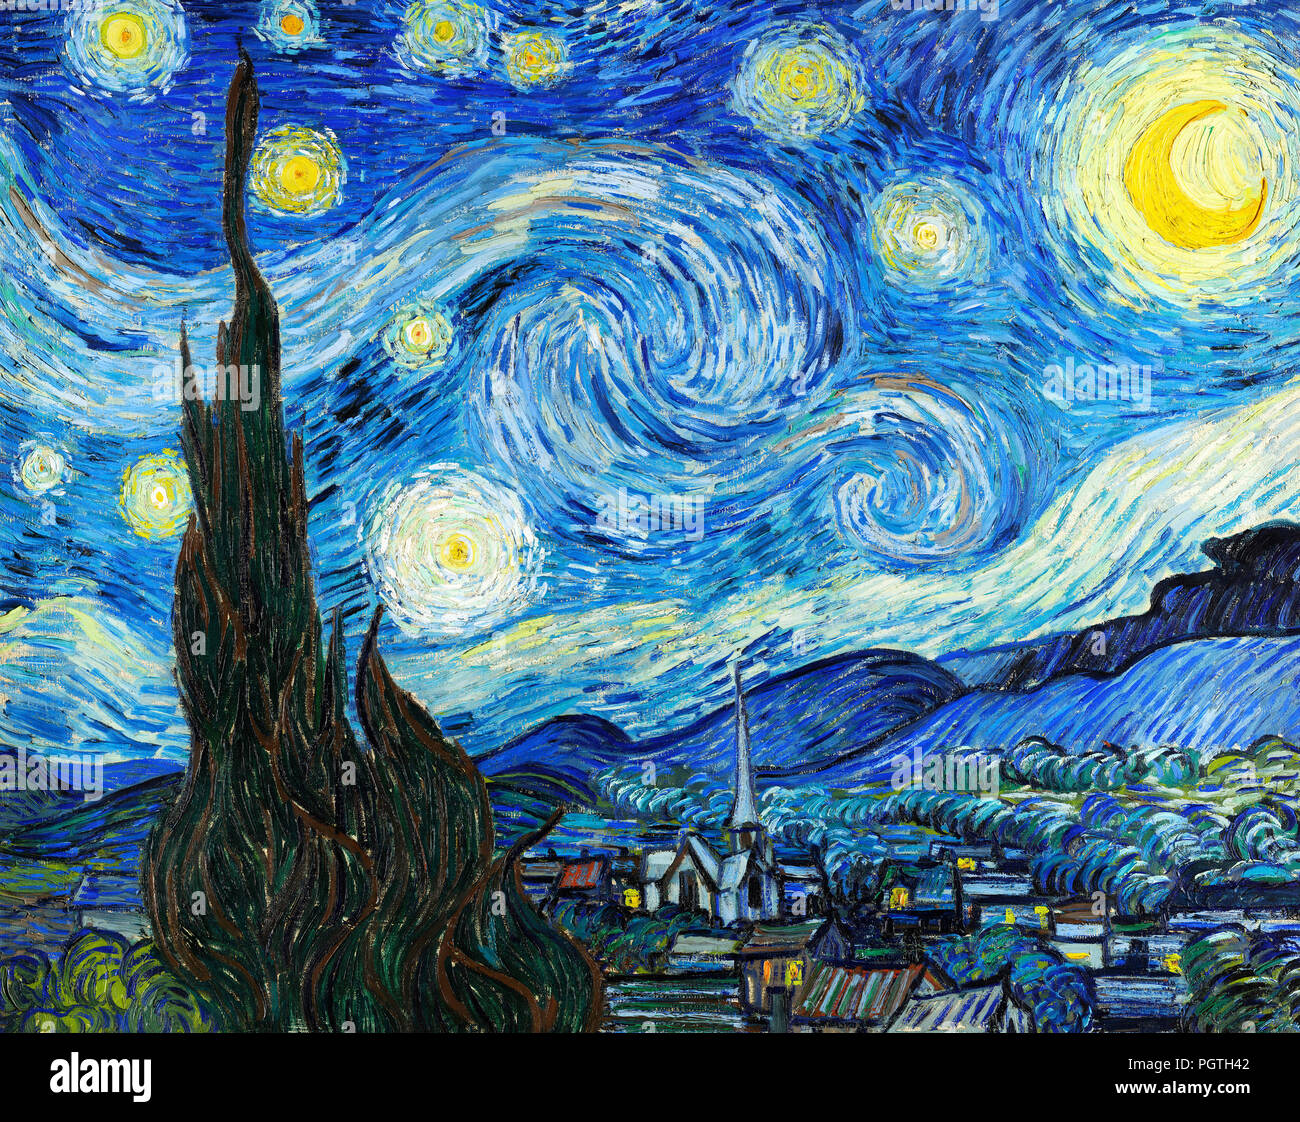 Van Gogh, Starry Night. 'The Starry Night' by Vincent van Gogh (1853-1890), oil on canvas, 1889 Stock Photo